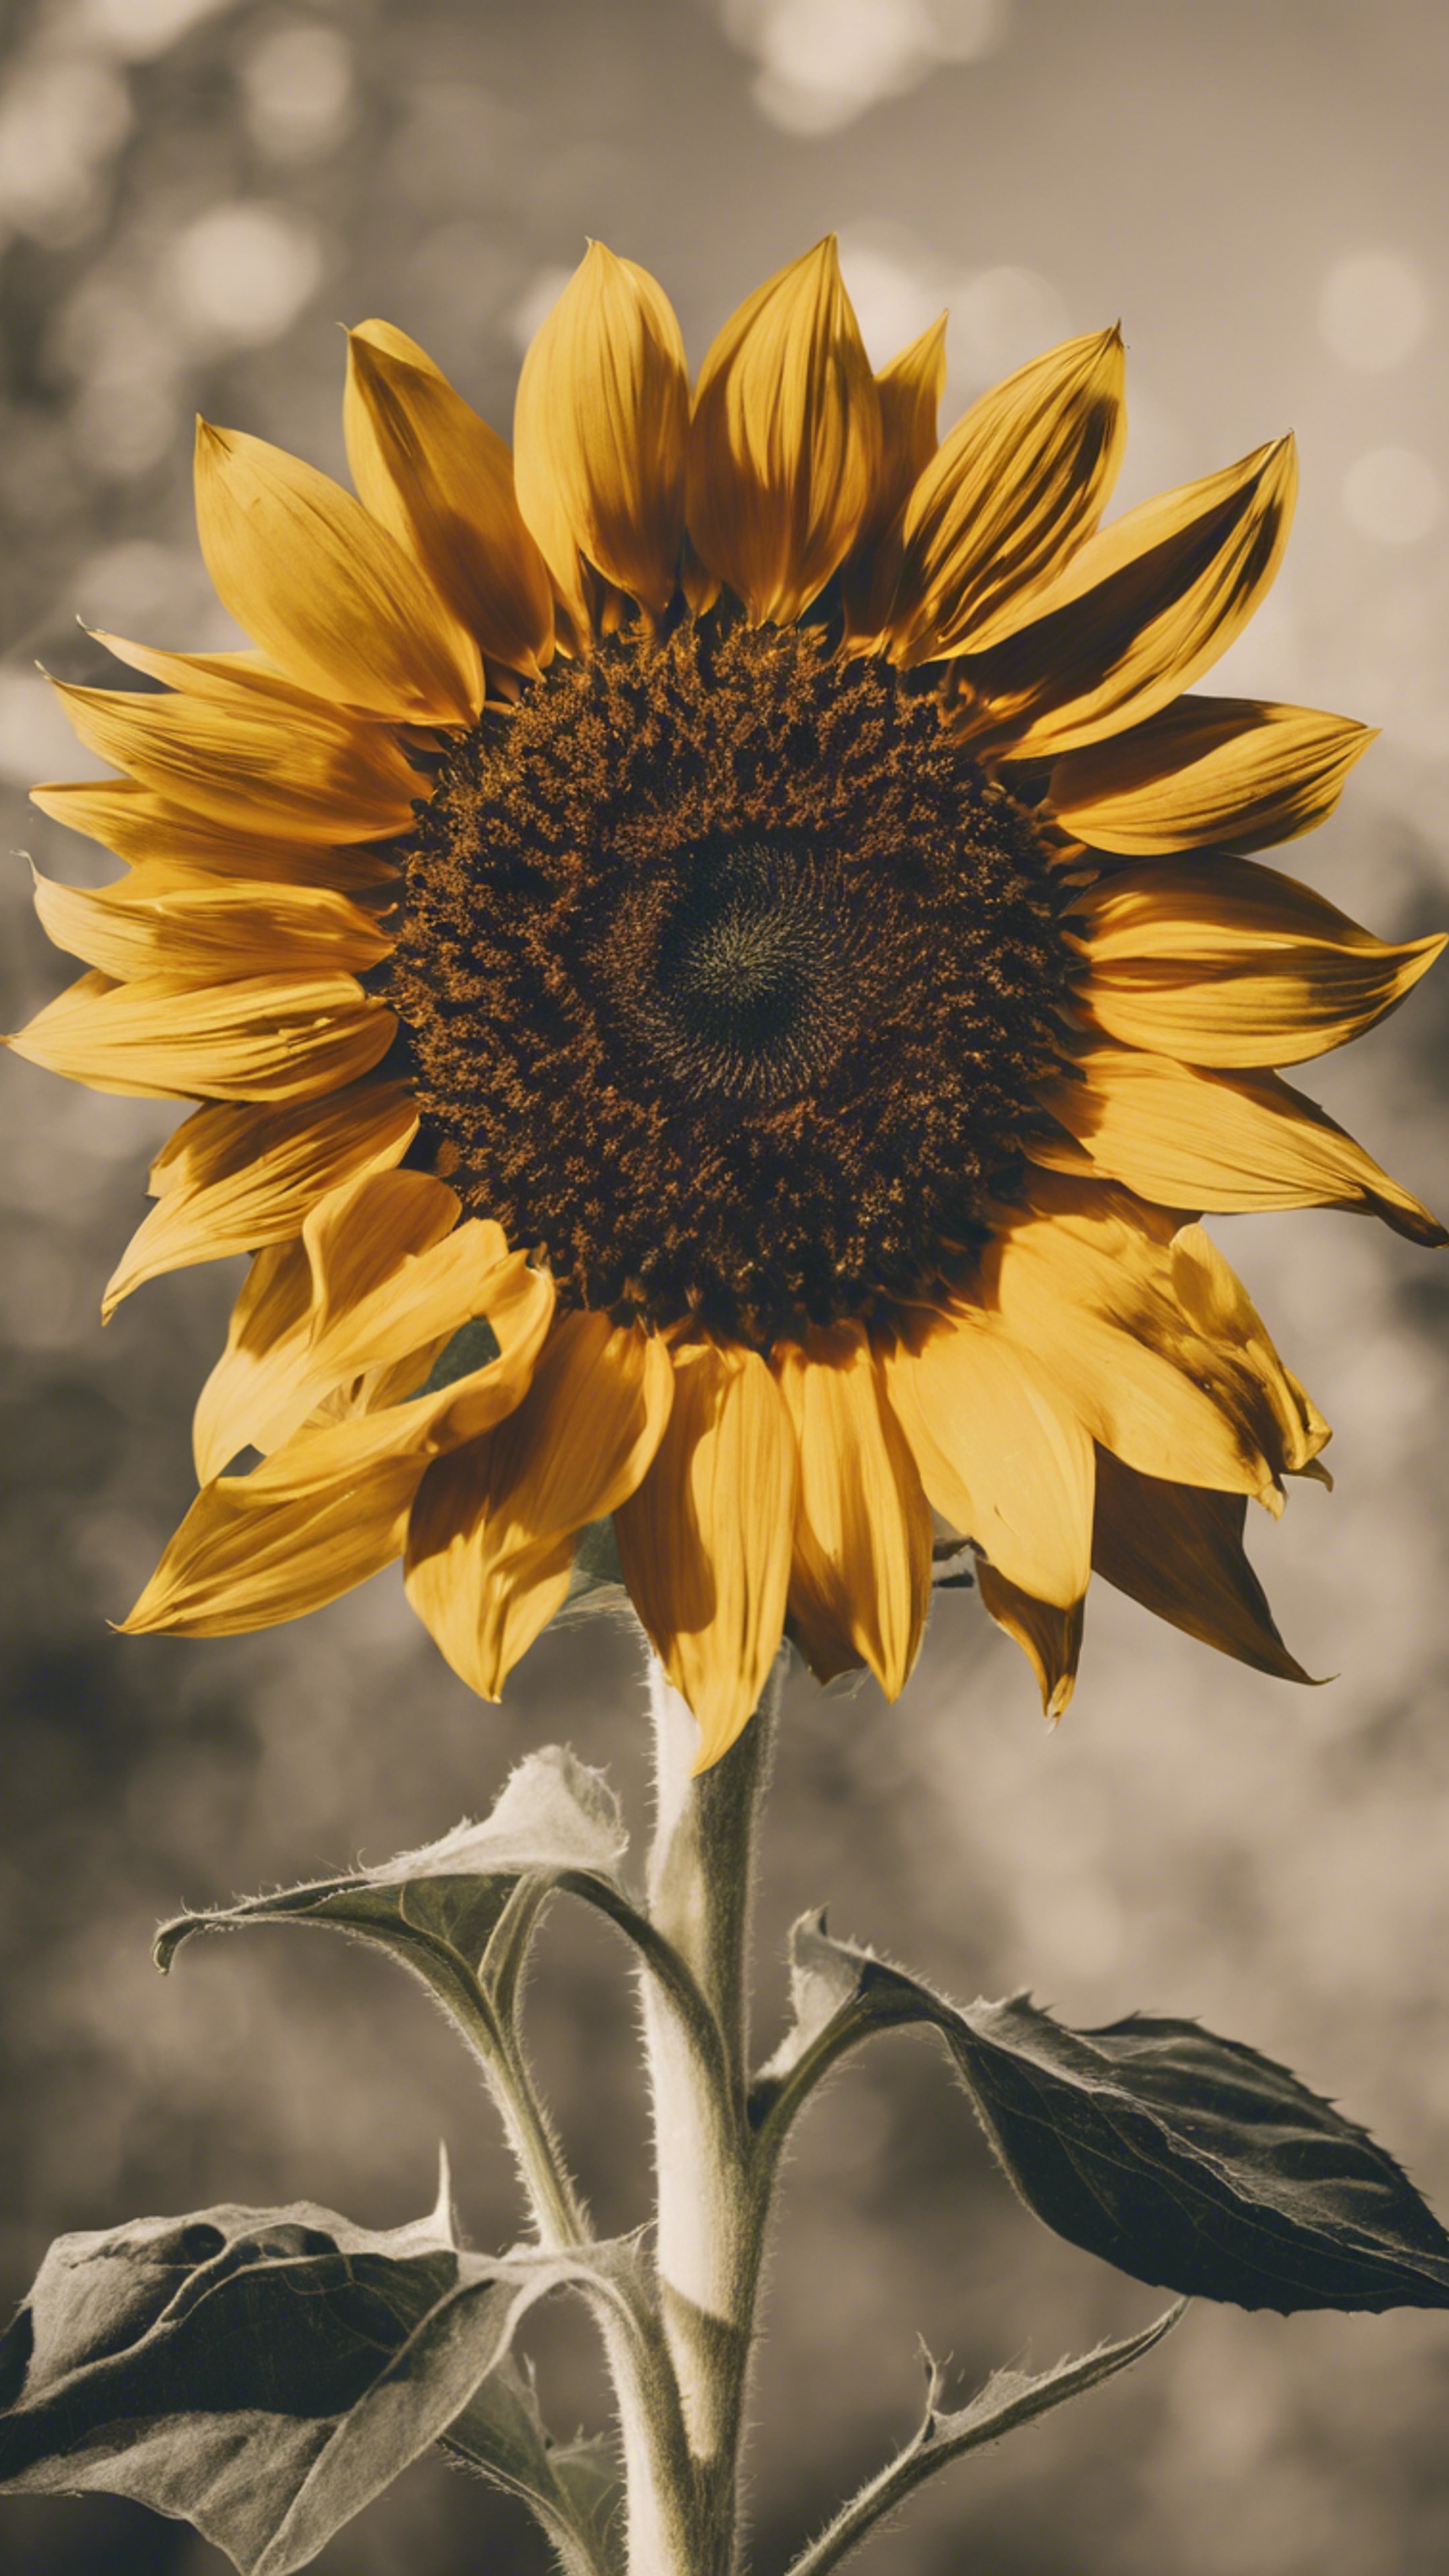 A stylized retro sunflower with bold yellow petals and a dark brown center. Papel de parede[13785a0774844f708a81]